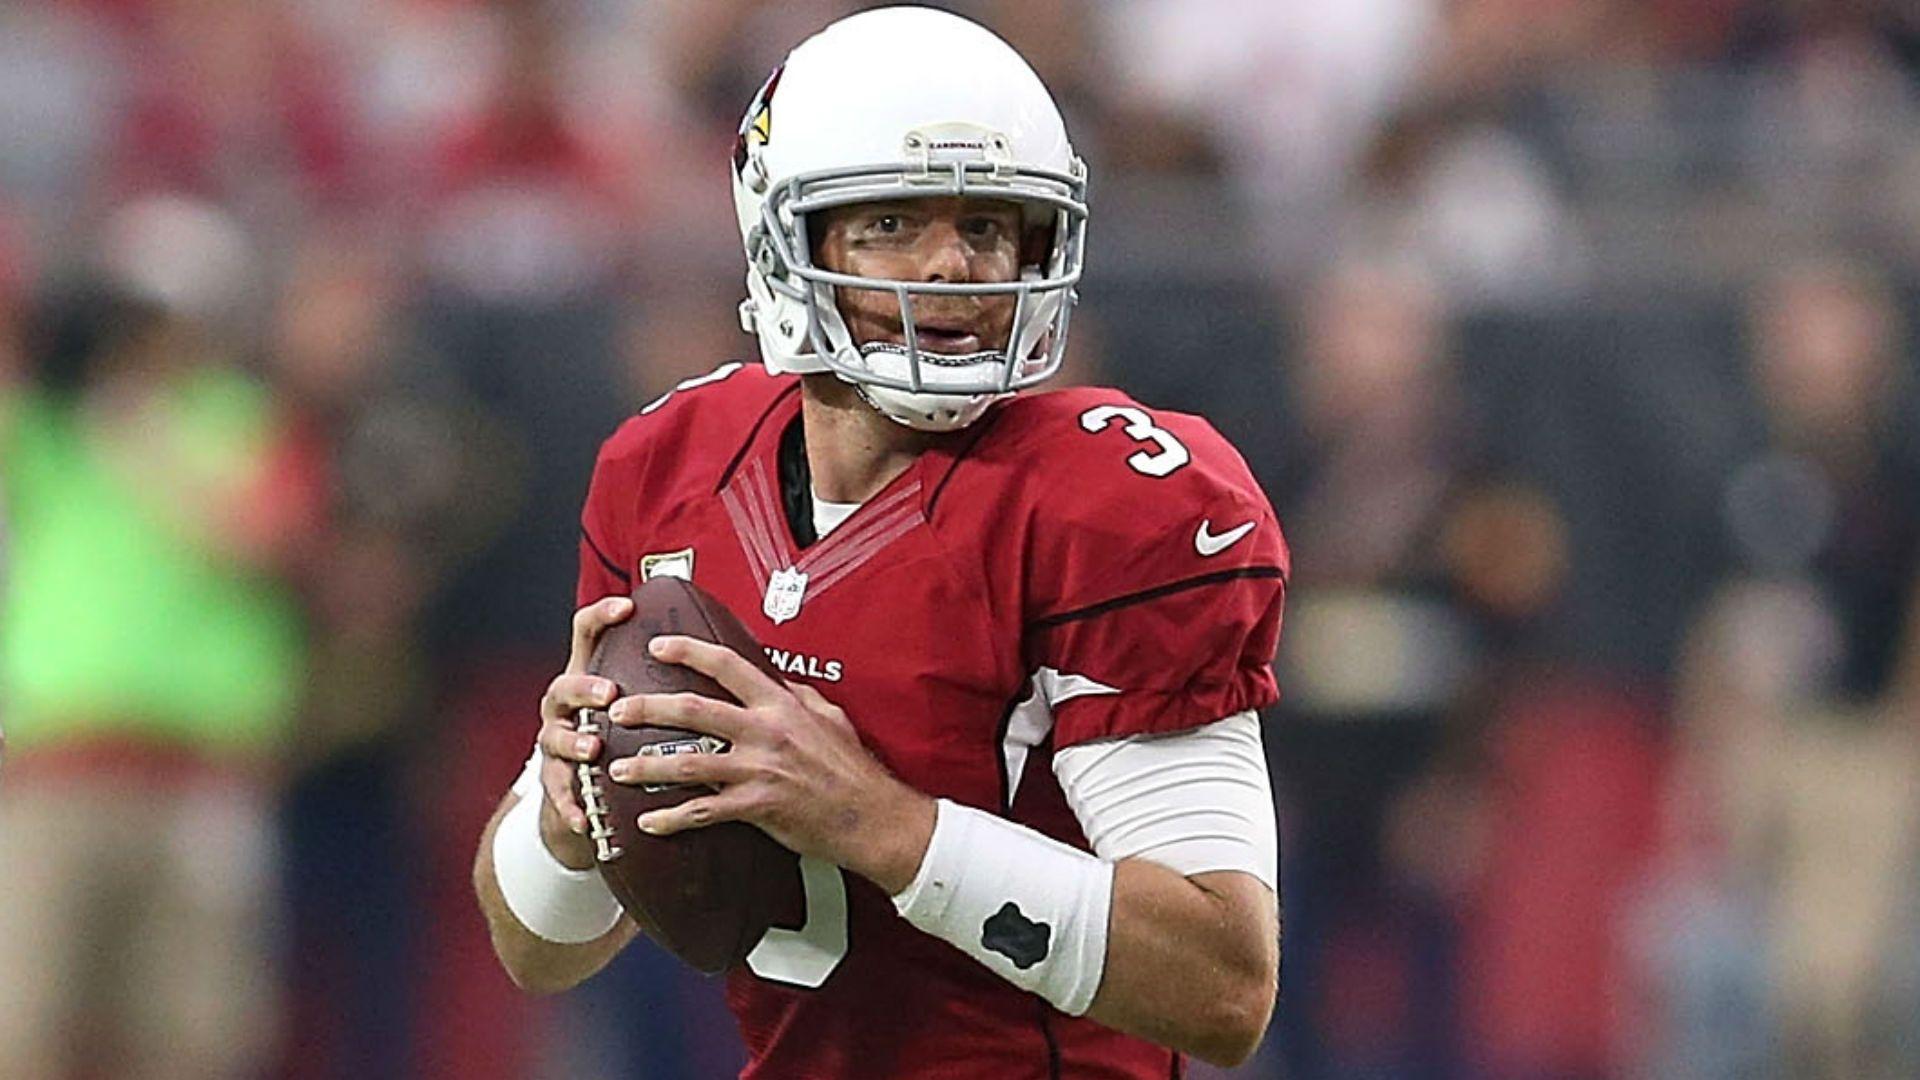 Cardinals' Carson Palmer says don't 'read into' report about